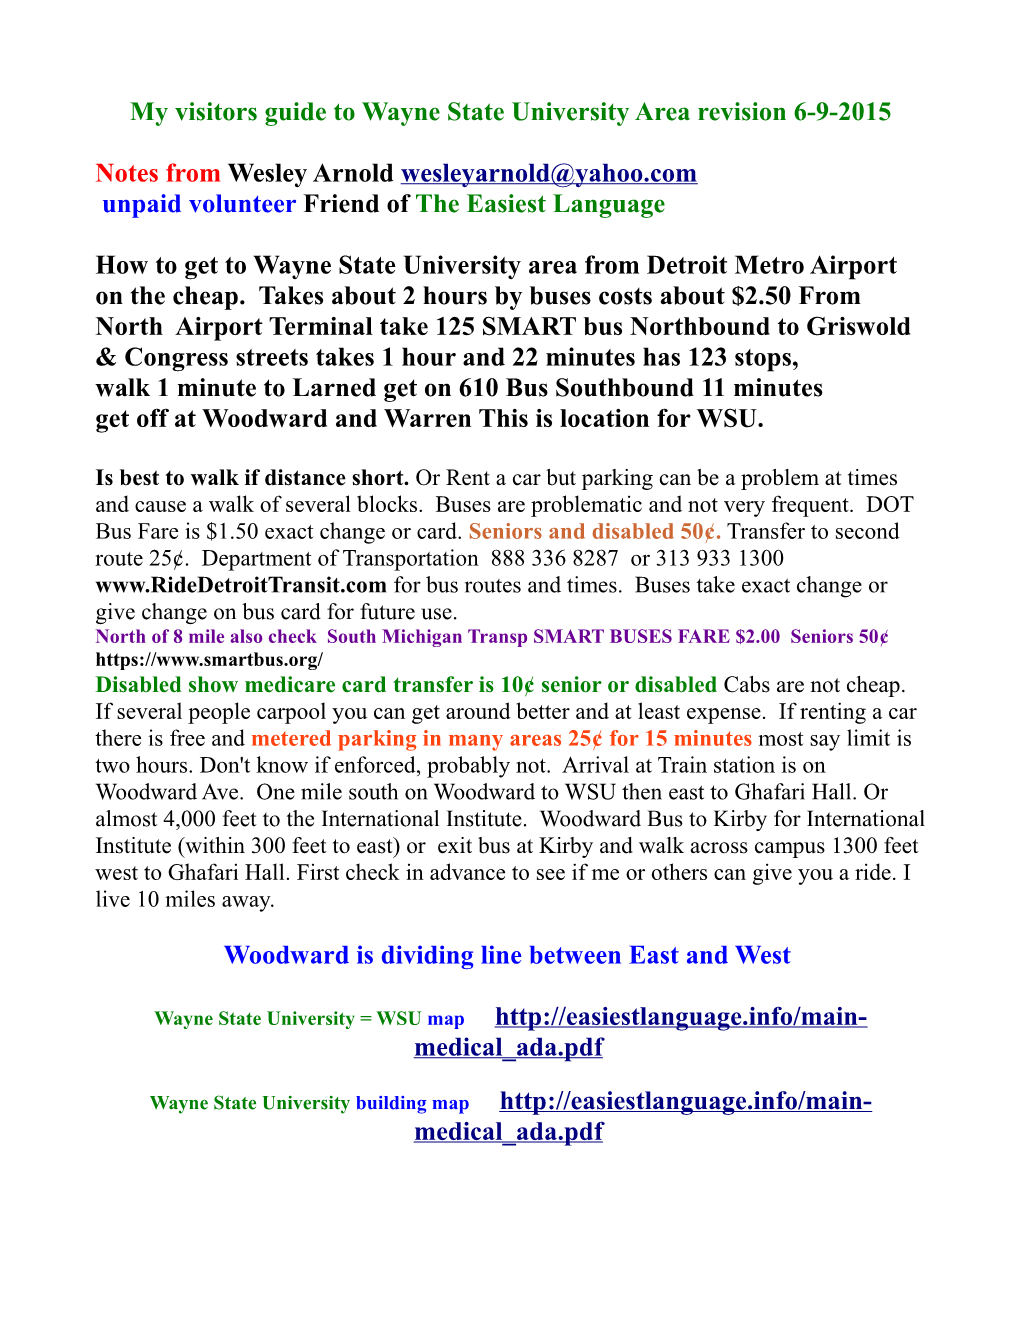 My Visitors Guide to Wayne State University Area Revision 6-9-2015